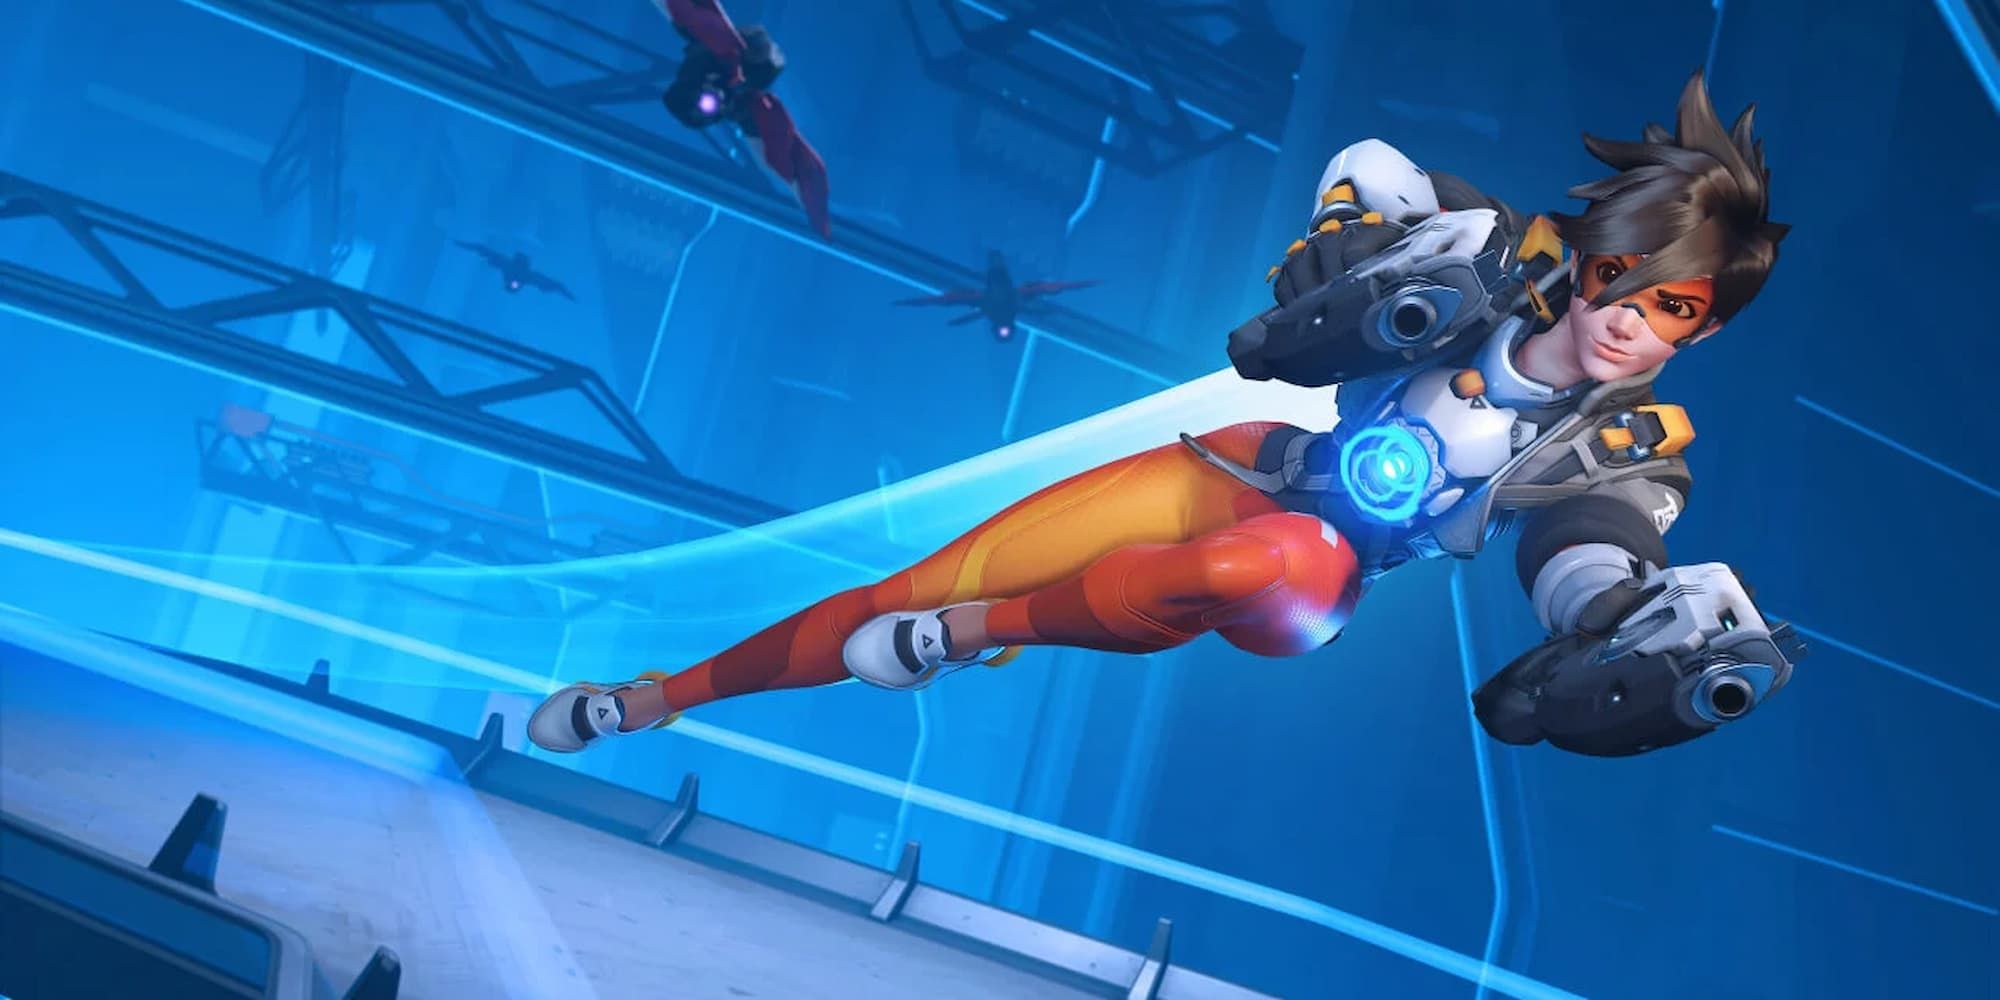 Tracer of Overwatch zooms on a walkway with her pistols at aimed while drones chase her.